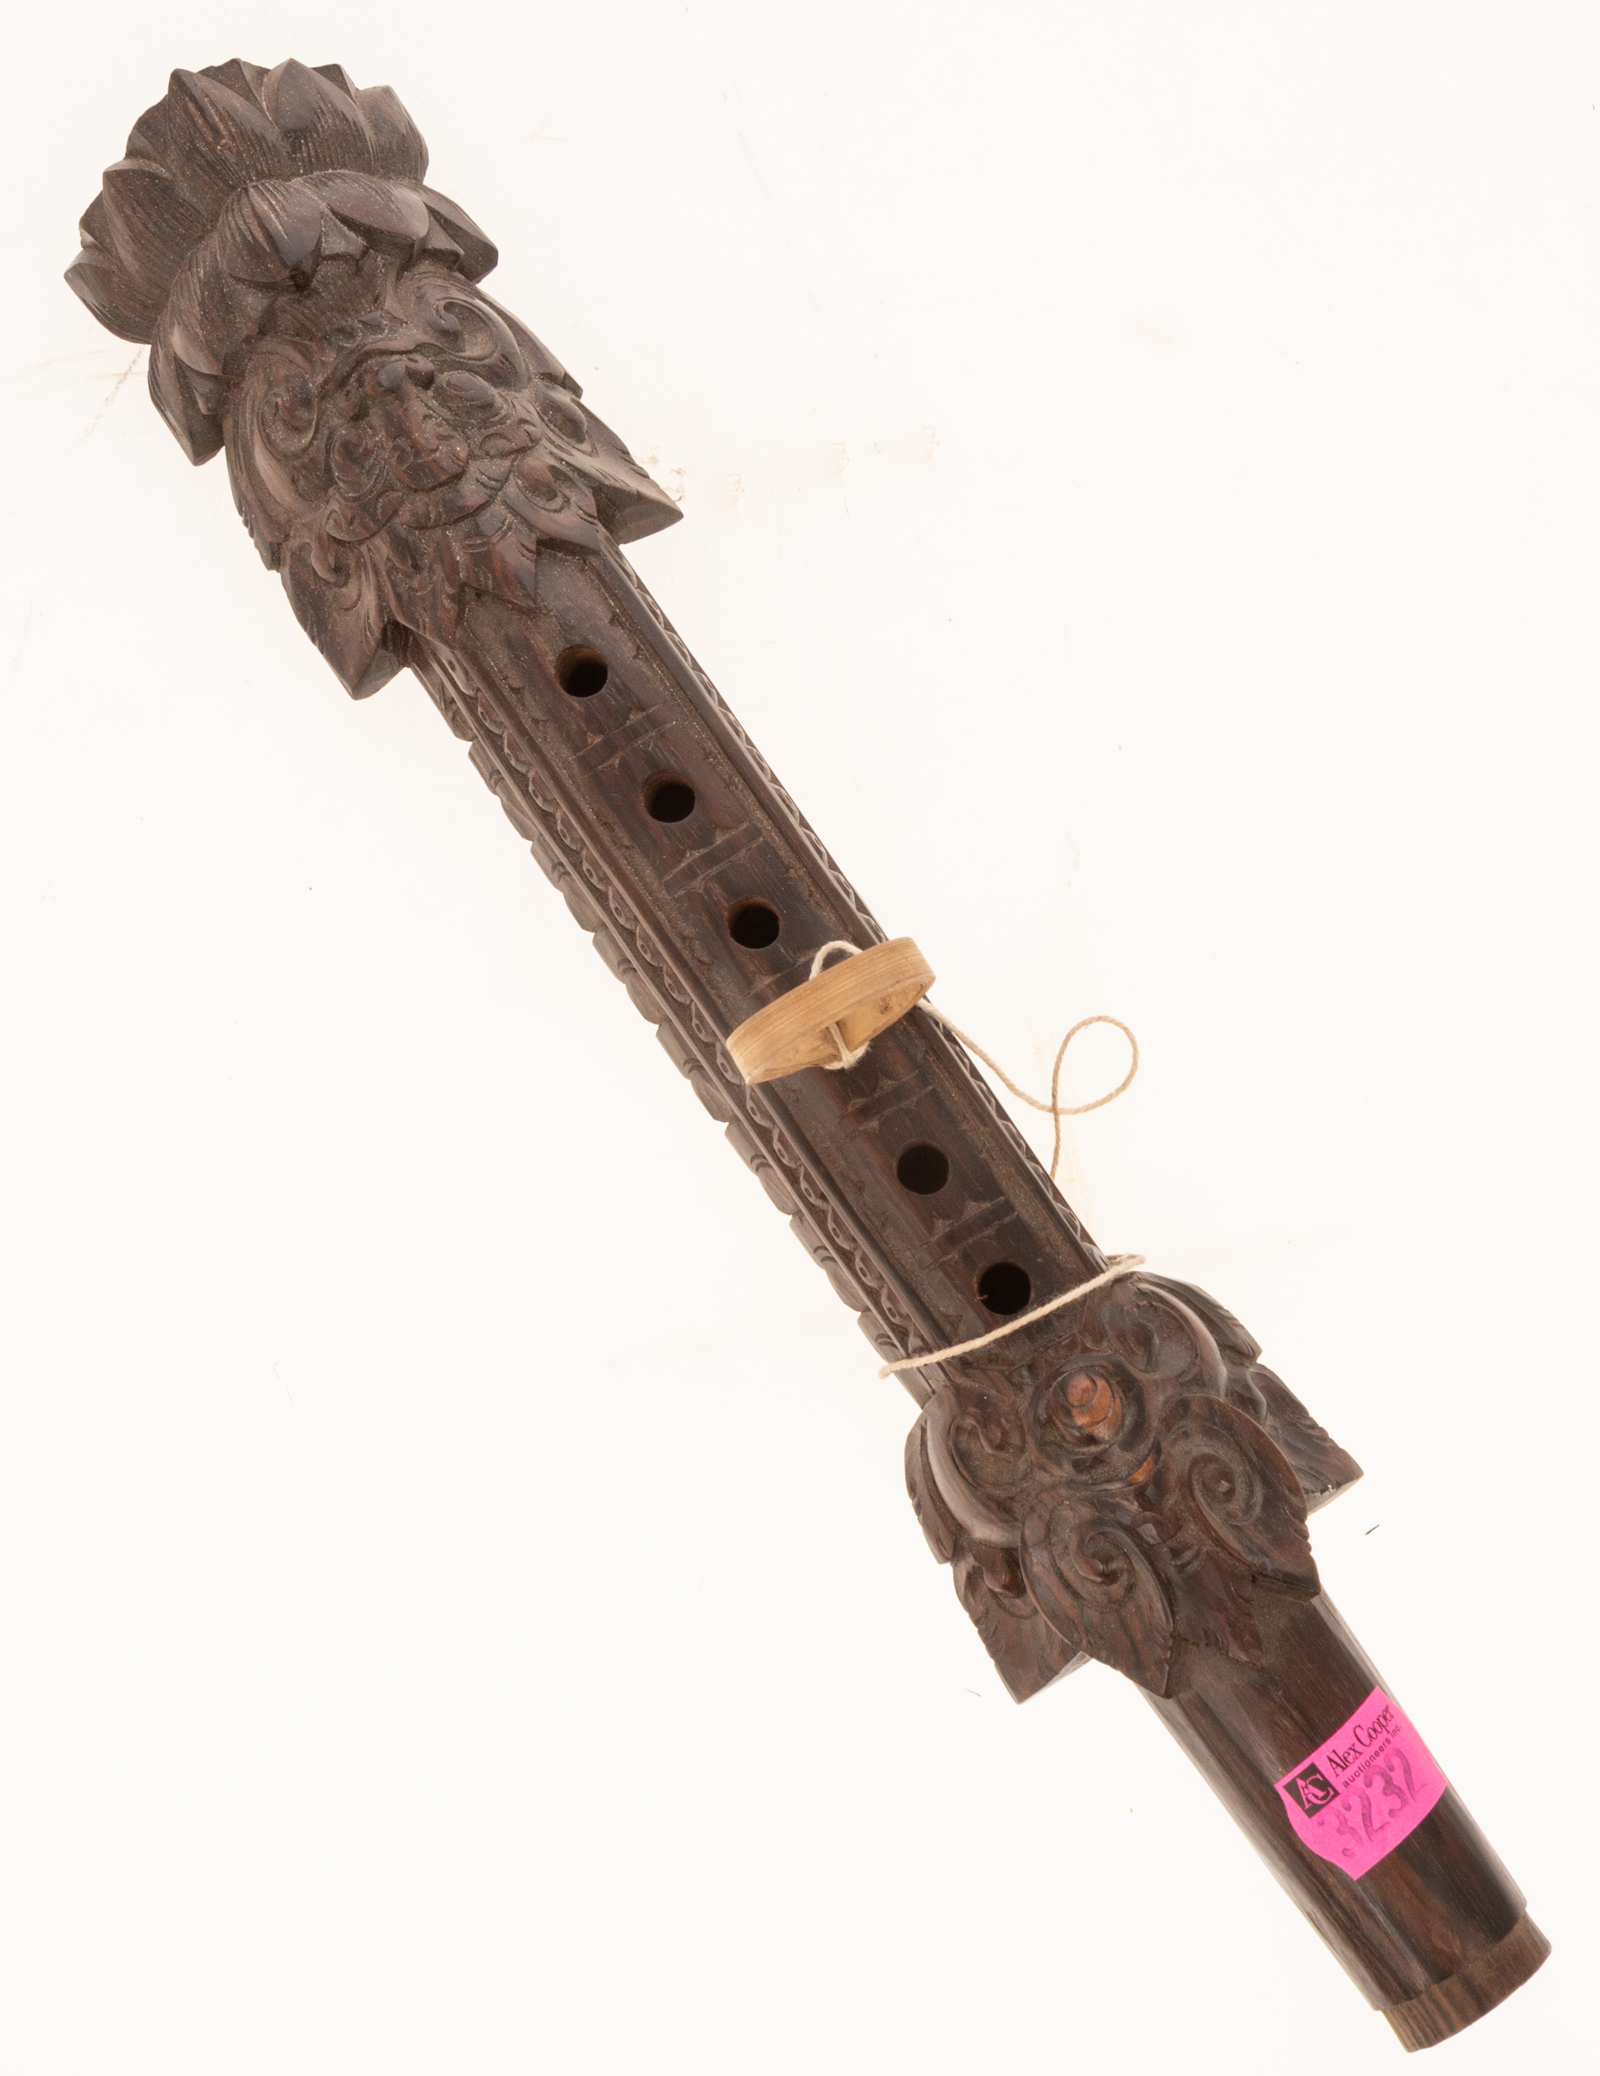 IATMUL FLUTE, CARVED WOOD From the Philippines,